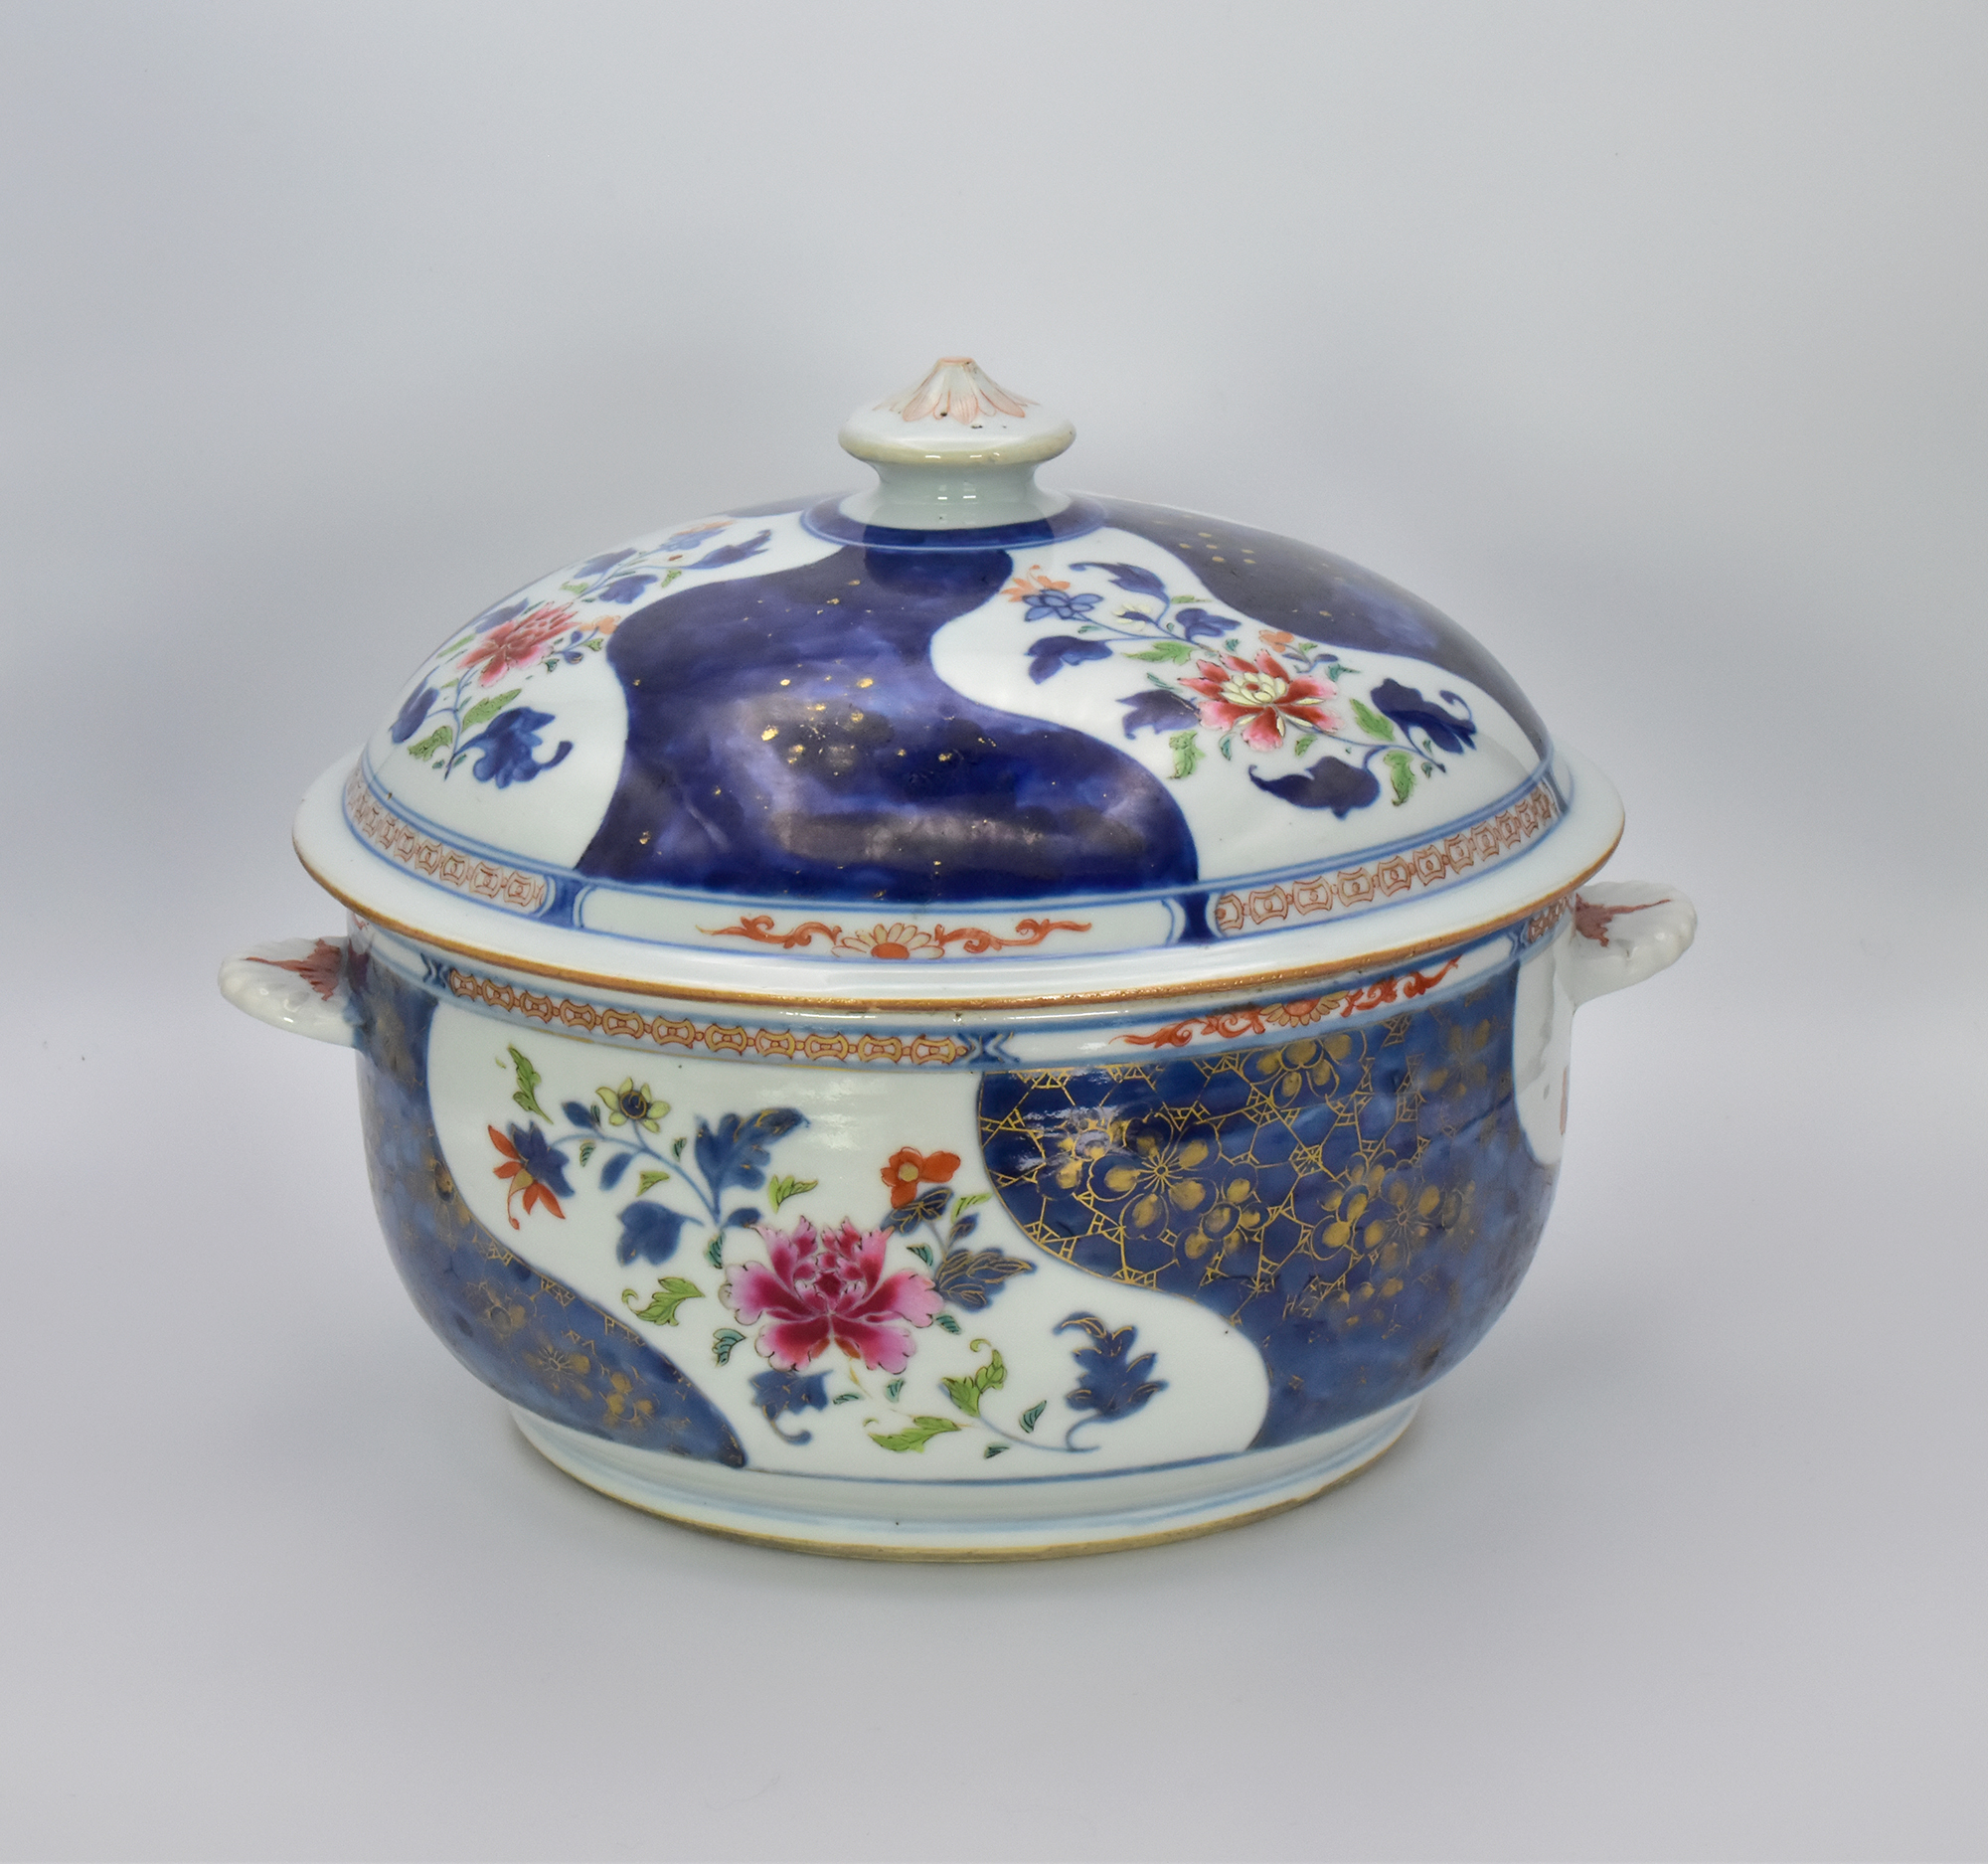 A PAIR OF CHINESE EXPORT ‘FAMILLE-ROSE’ PORCELAIN TUREENS AND COVERS, QIANLONG PERIOD, 1736 – 1795 - Image 2 of 9